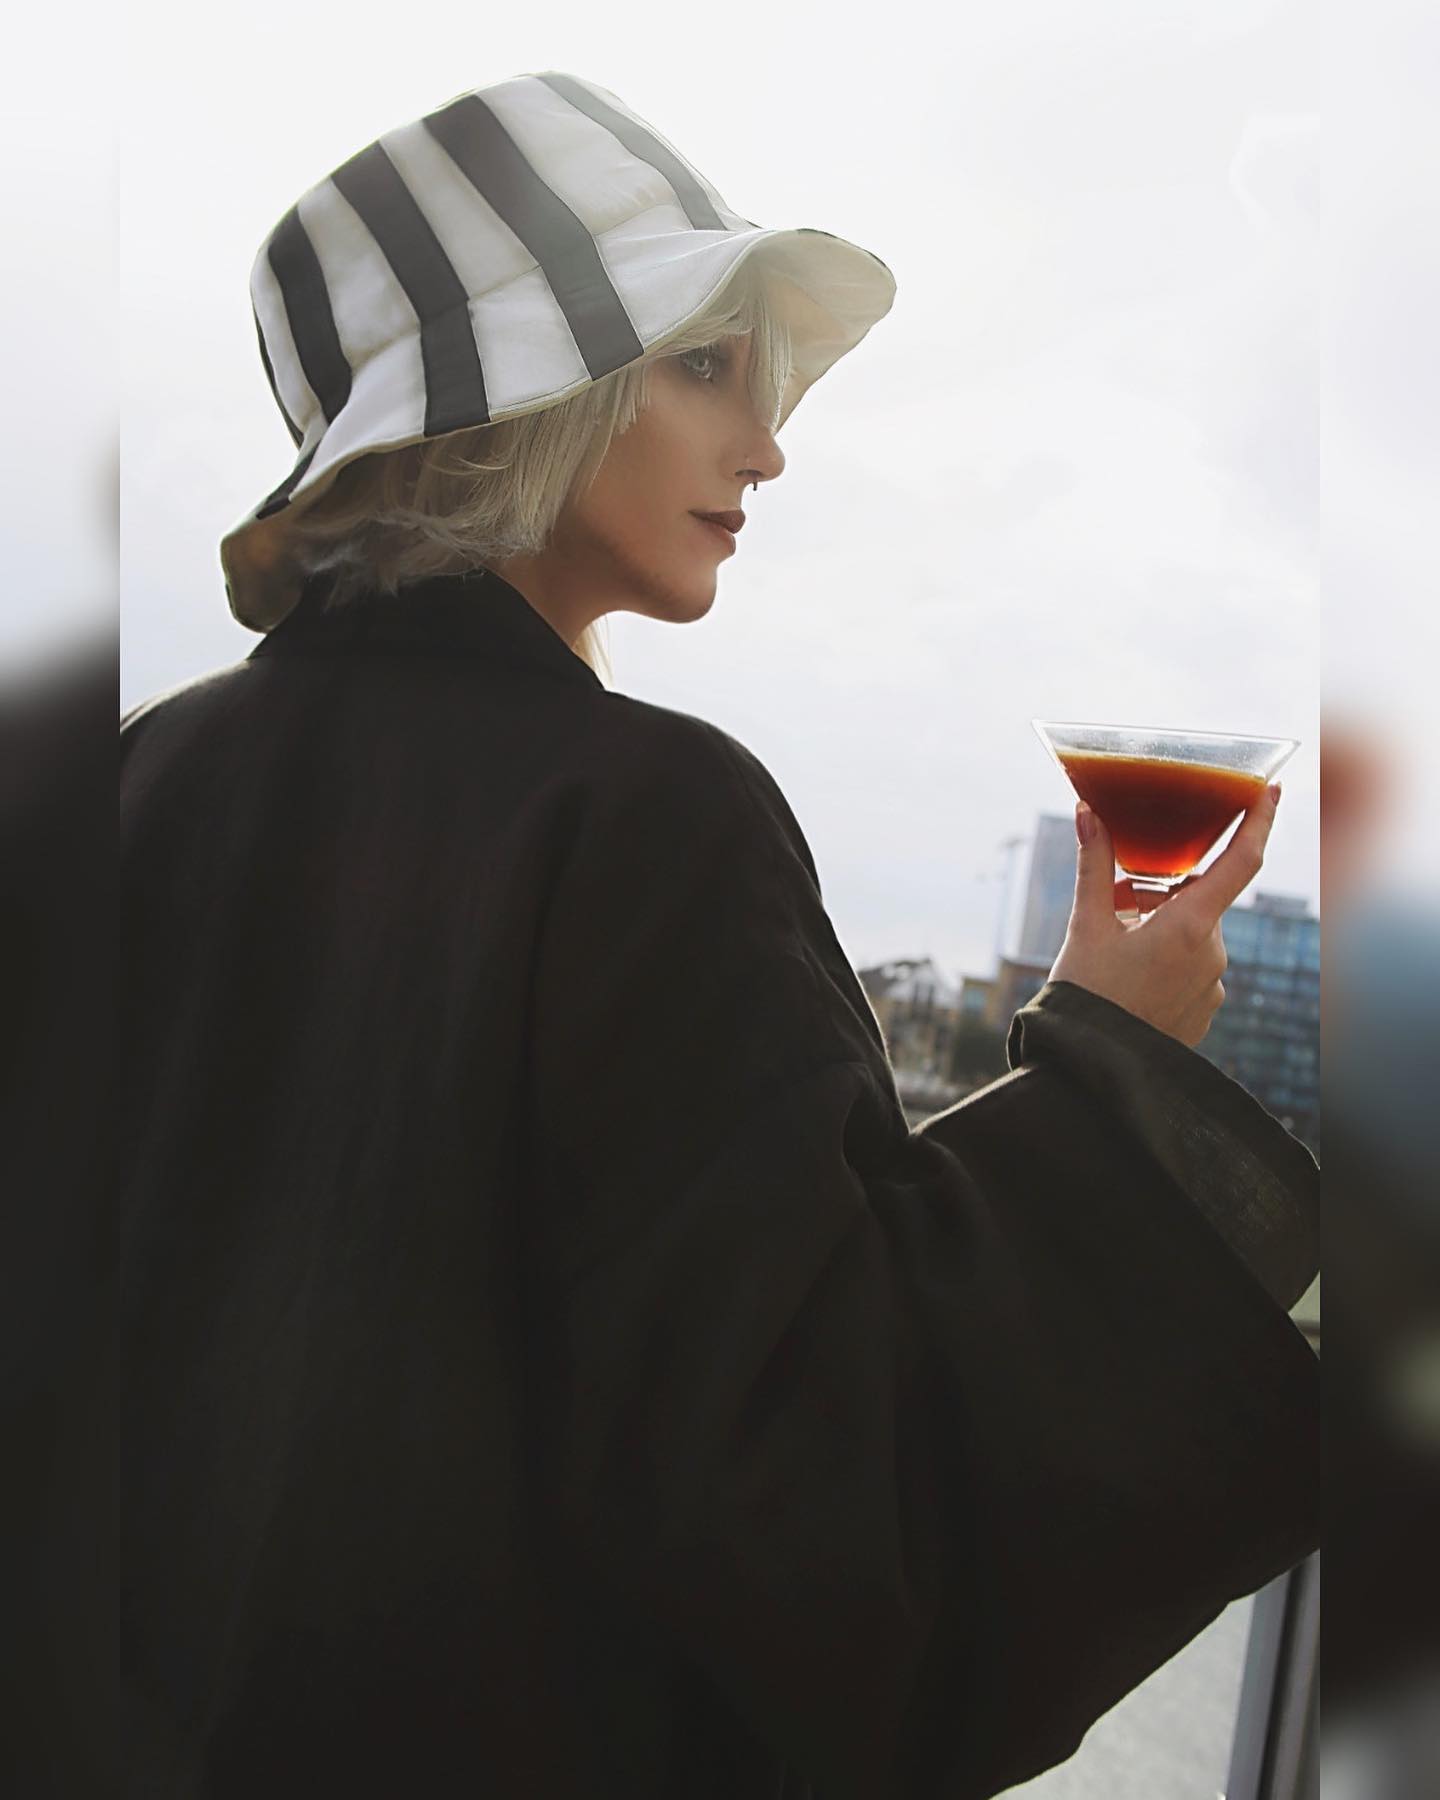 Happy new year!! 🥂
~
starting off the year with my fave 🥹 wishing everyone a happy 2024 ^_^
~
✨cosplayer: @riotwolf.cos 
🍾character: urahara kisuke
✨anime: bleach
🍾costume by @tara.cosplay 
✨airbrushing by @sammyscosplay 
📸 @hyper.cos 
~
~
~
#urahara #uraharakisuke #uraharacosplay #bleach #bleachcosplay #bleachtybw #bleachanime #tybw #thousandyearbloodwar #cosplay #mcmlondoncomiccon